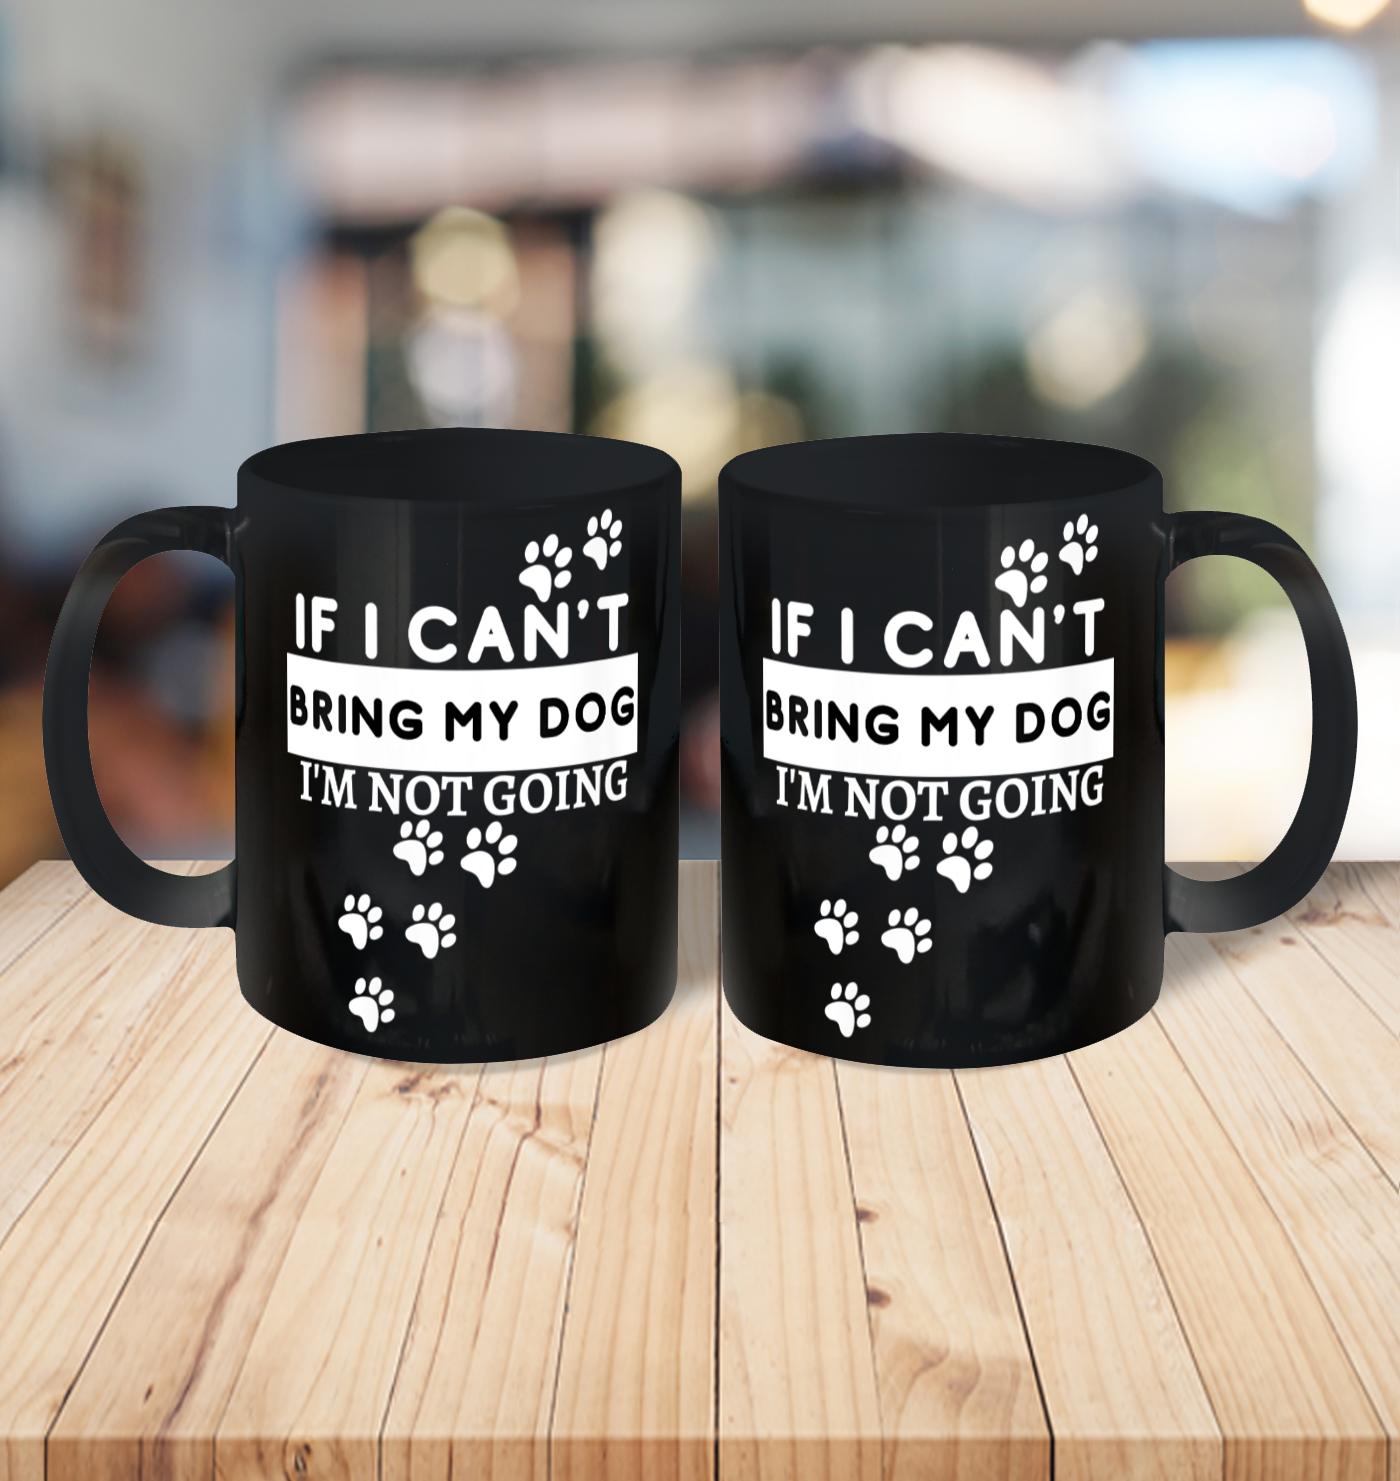 Womens If I Can't Take My Dog, I'm Not Going! Funny Dog Lover's Ceramic Mug 11oz 6